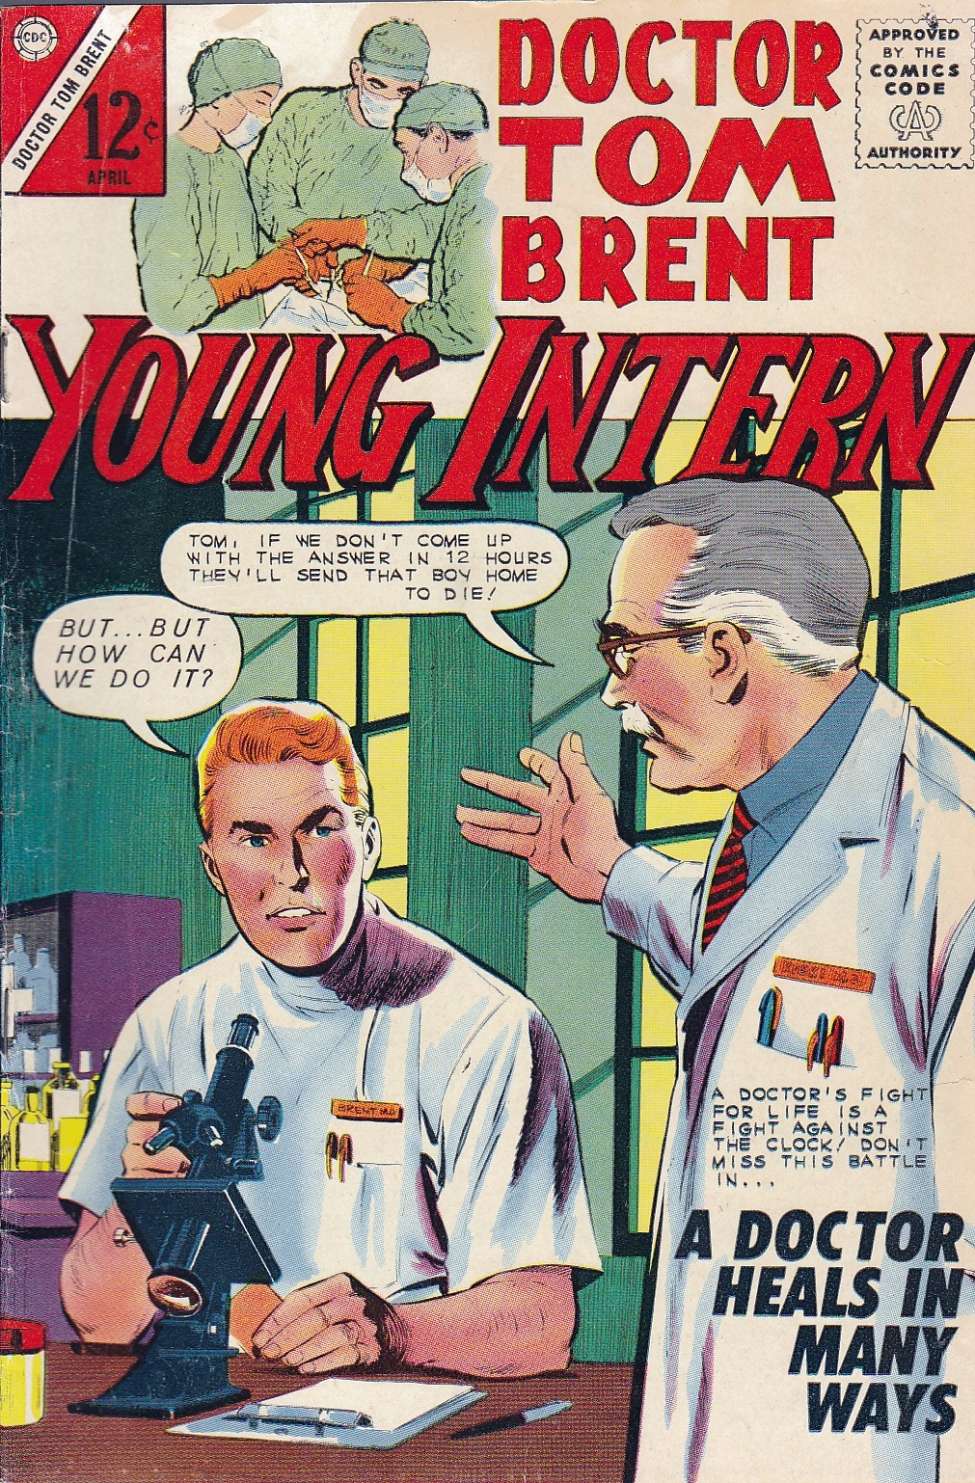 Book Cover For Doctor Tom Brent, Young Intern 2 (damaged) - Version 2